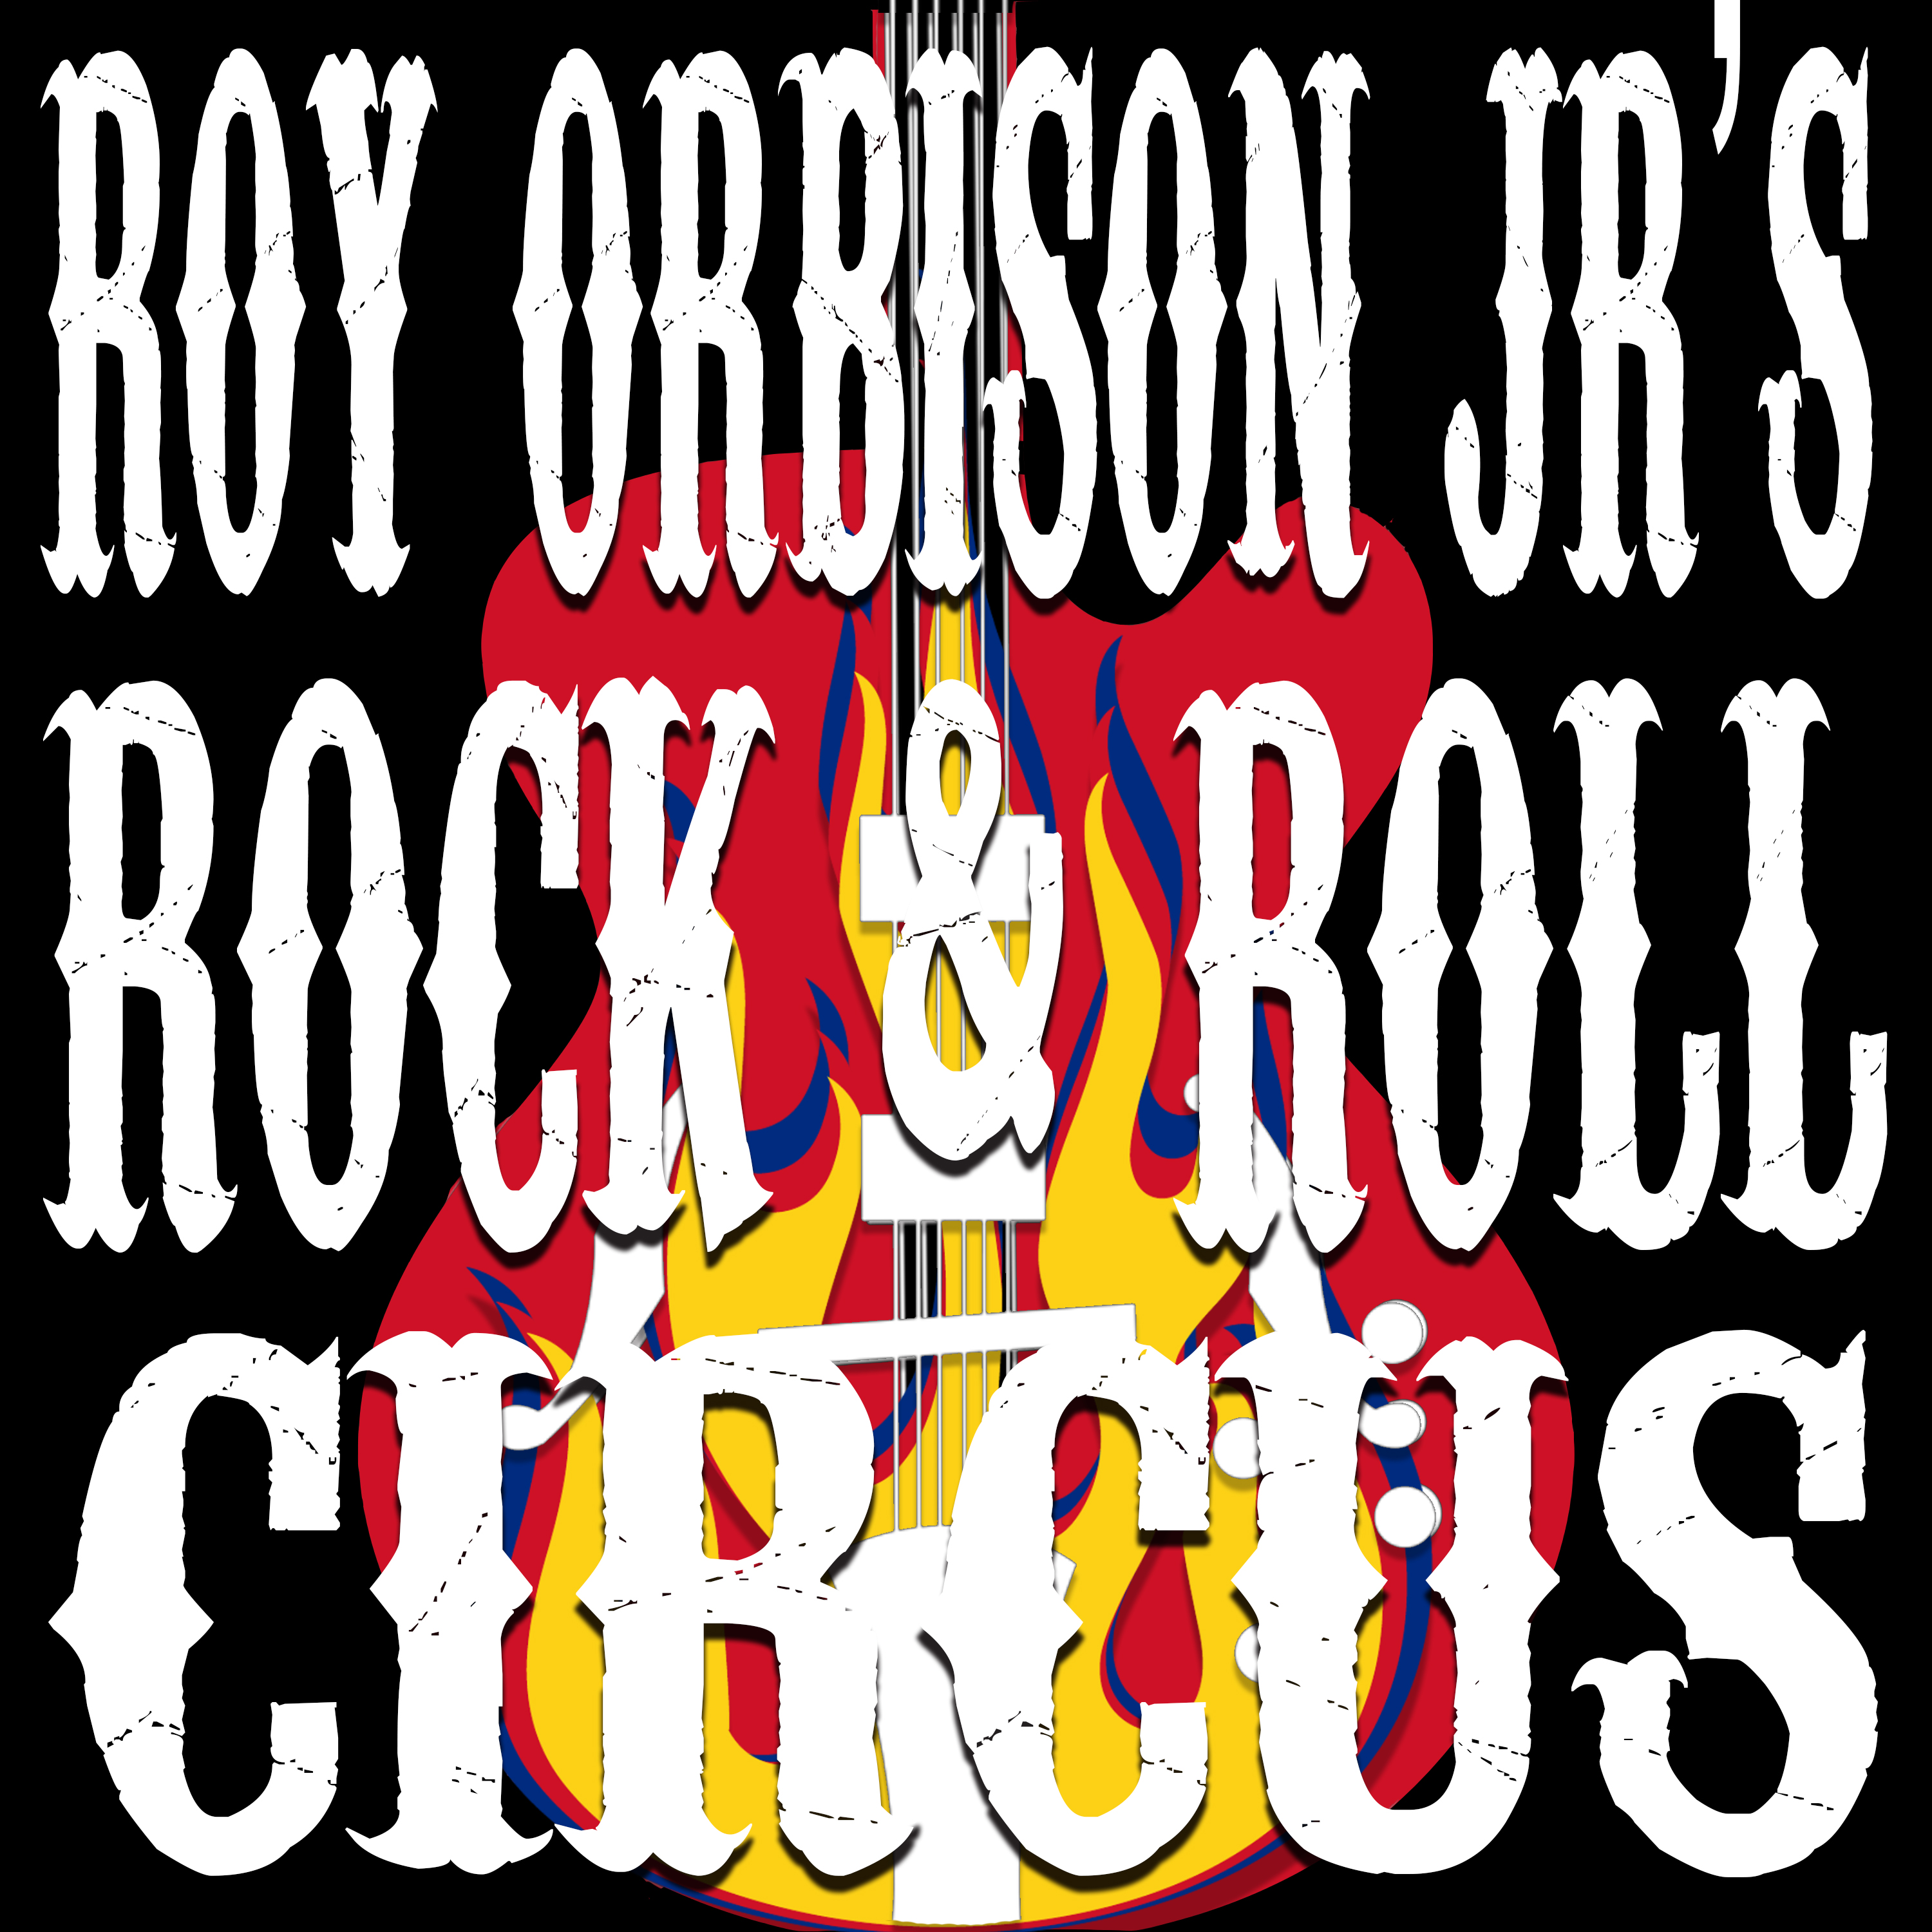 Roy Orbison Jr's Rock and Roll Circus